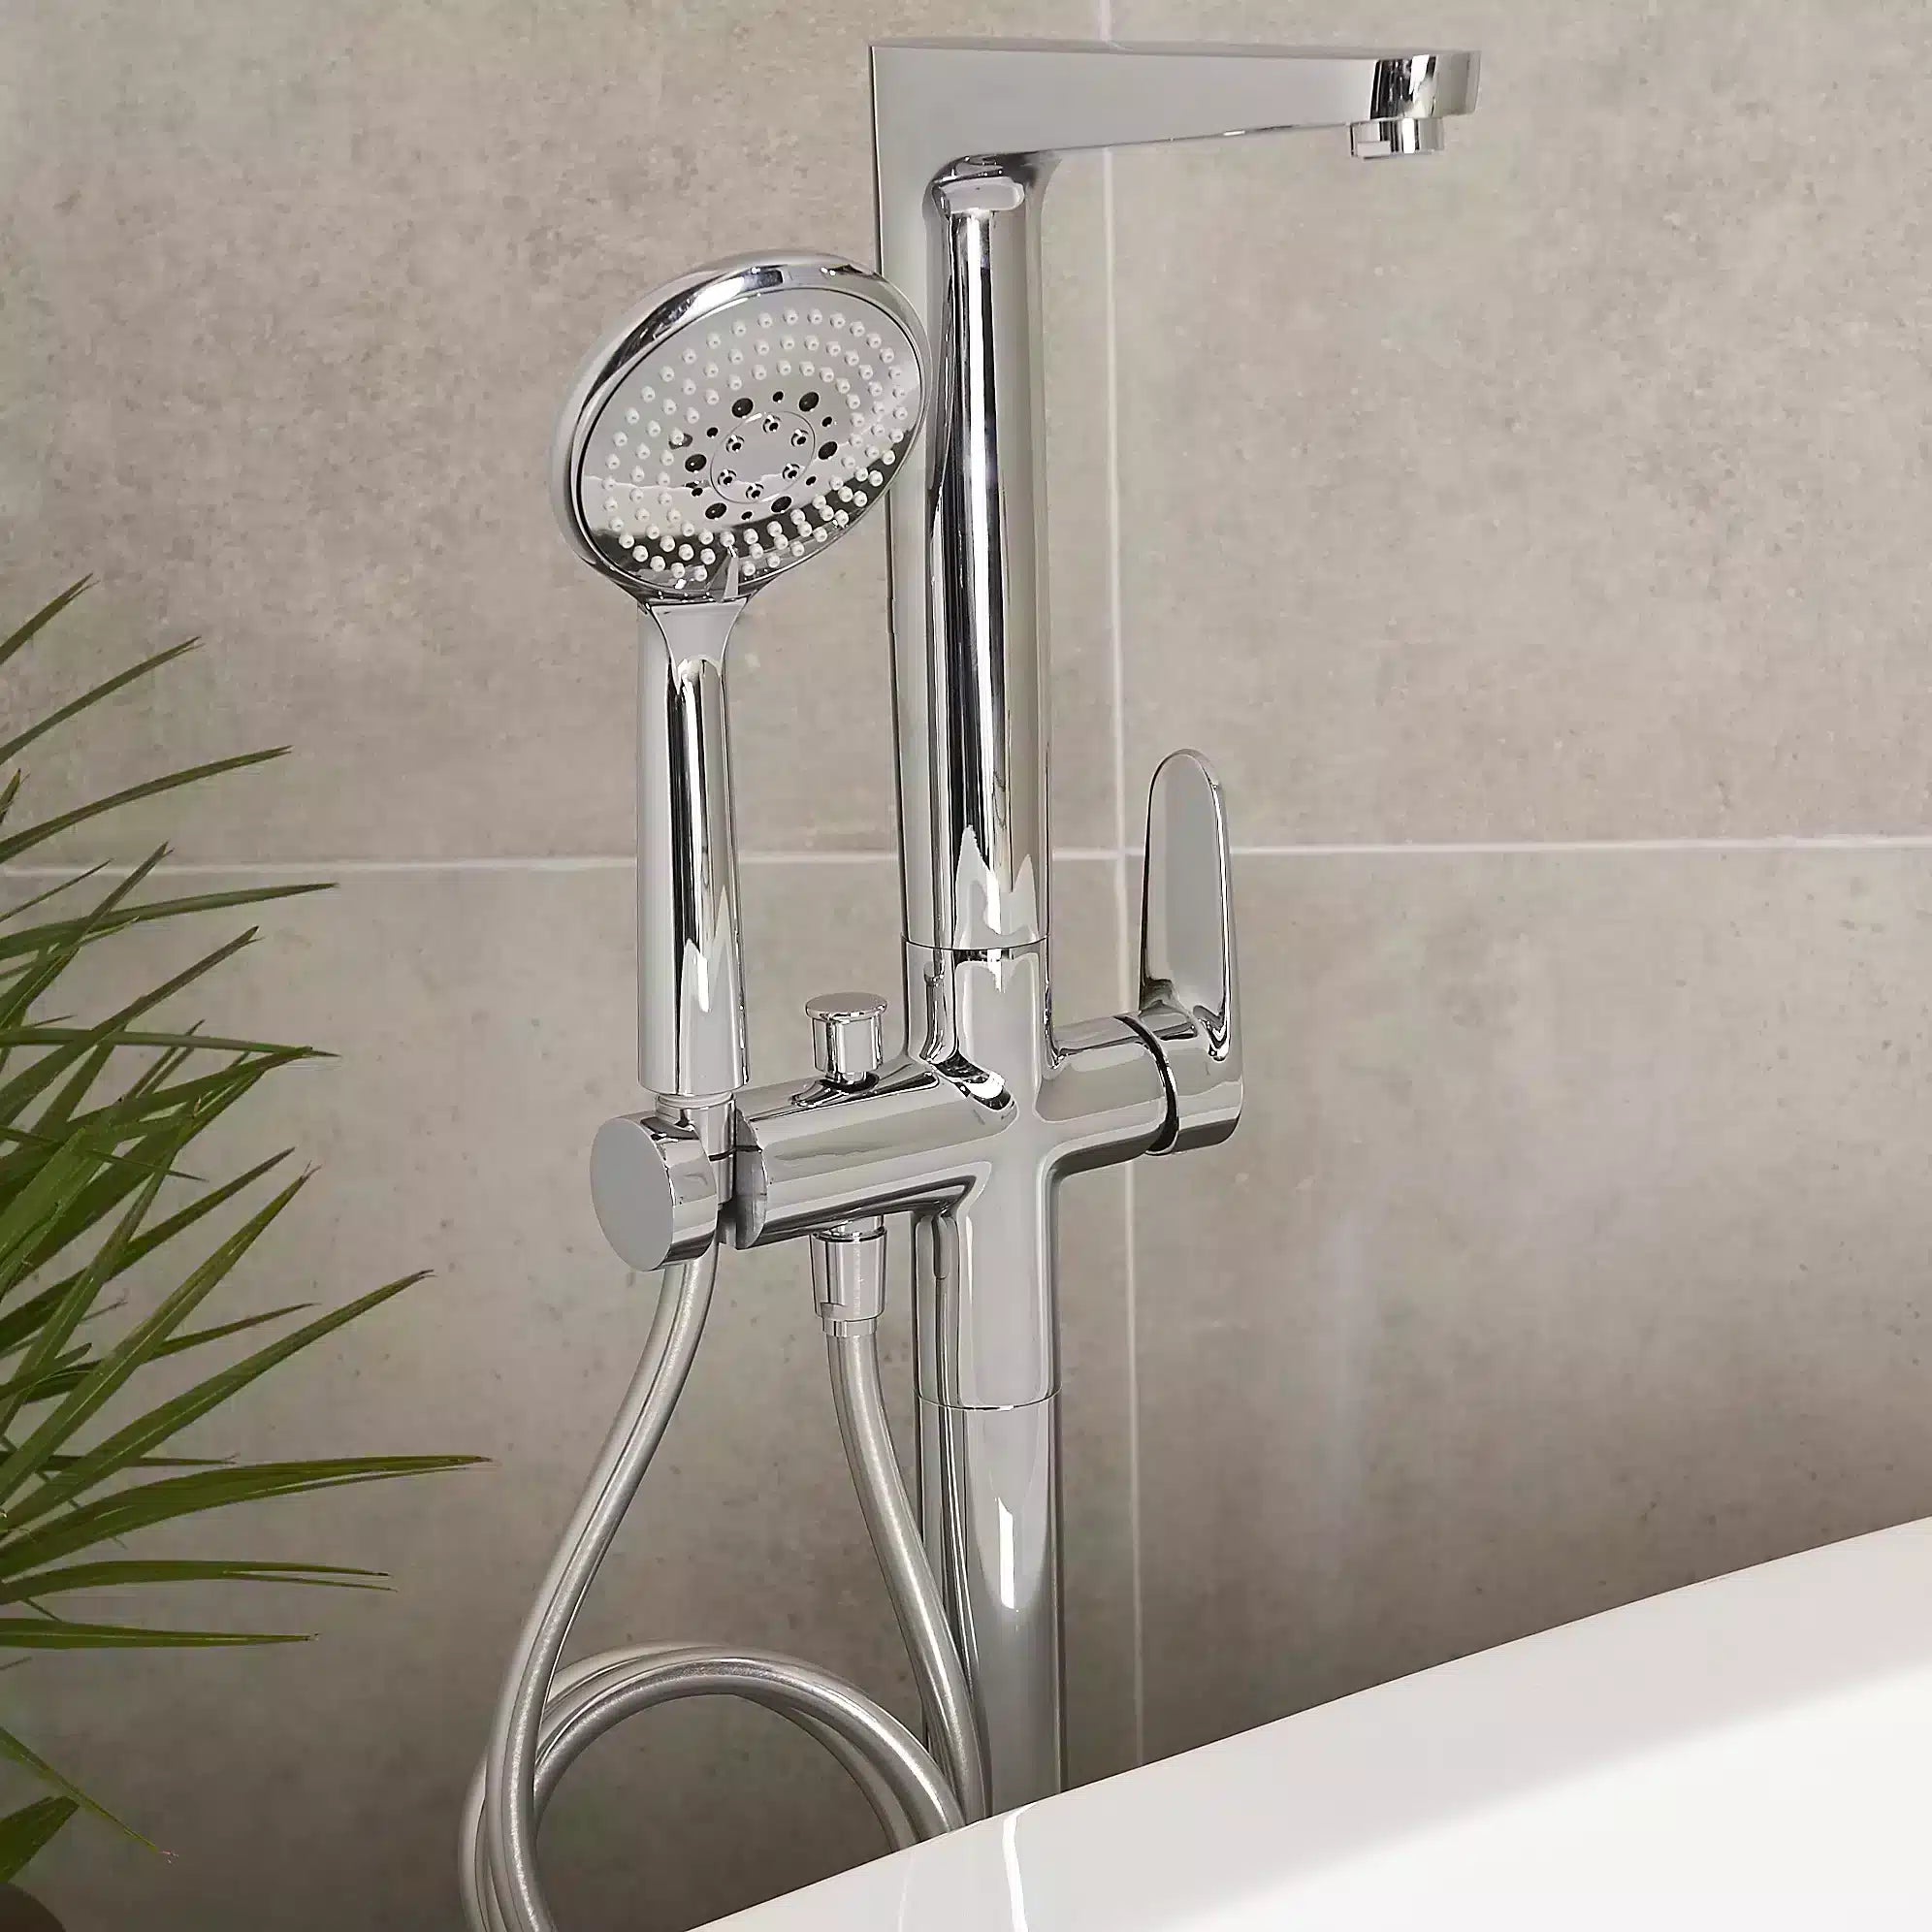 GoodHome Cavally Chrome effect Bath Shower mixer Tap 9721